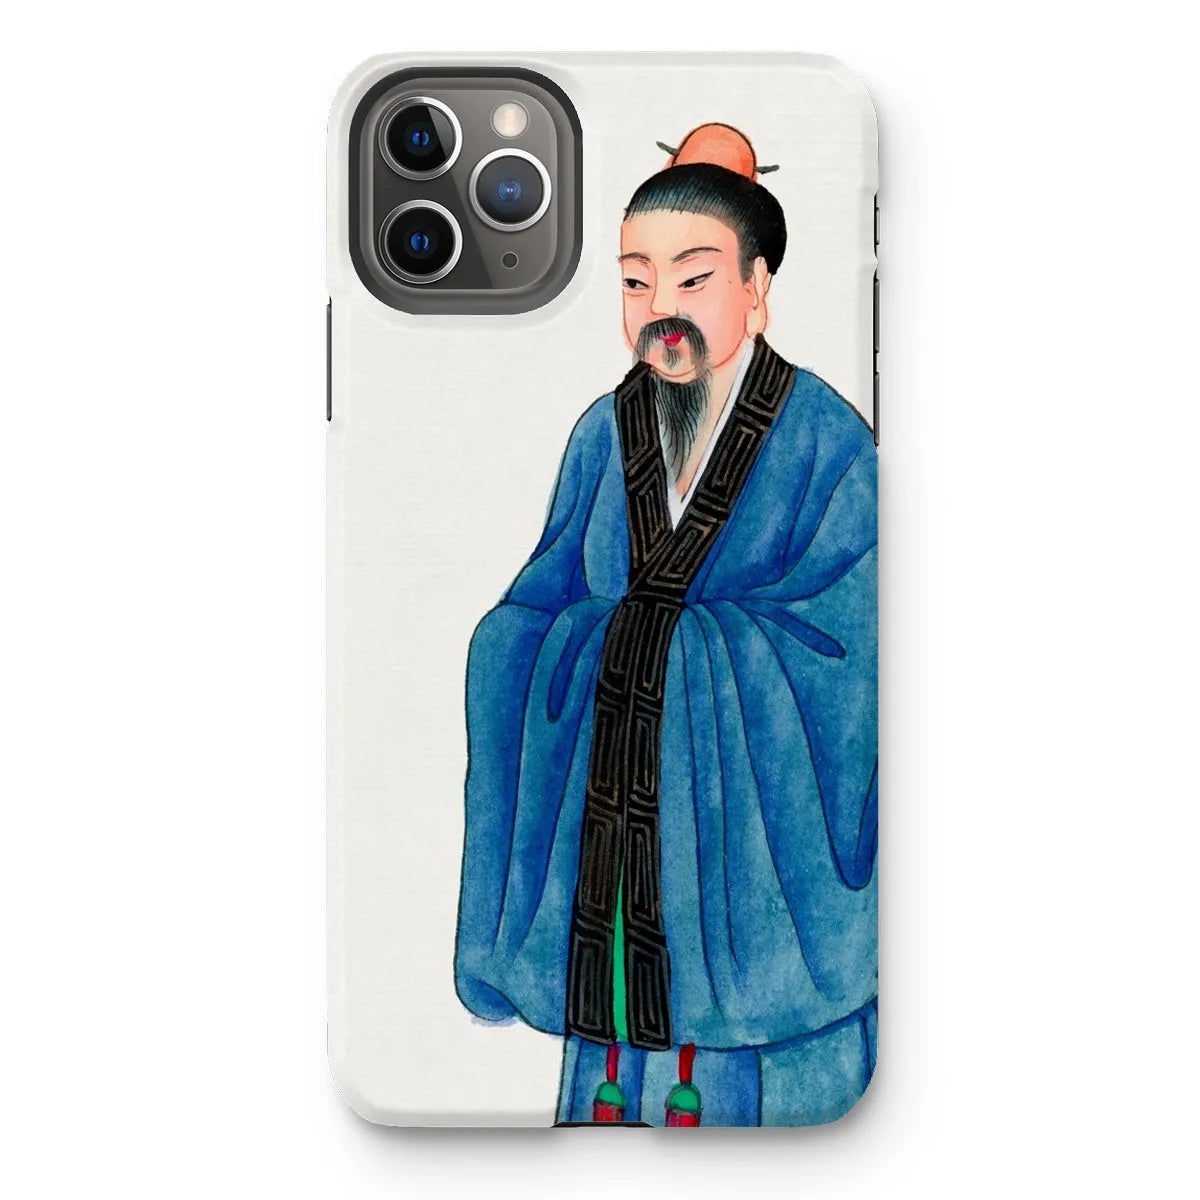 Grand Master - Chinese Buddhist Aesthetic Art Phone Case - Iphone 11 Pro Max / Matte - Mobile Phone Cases - Aesthetic